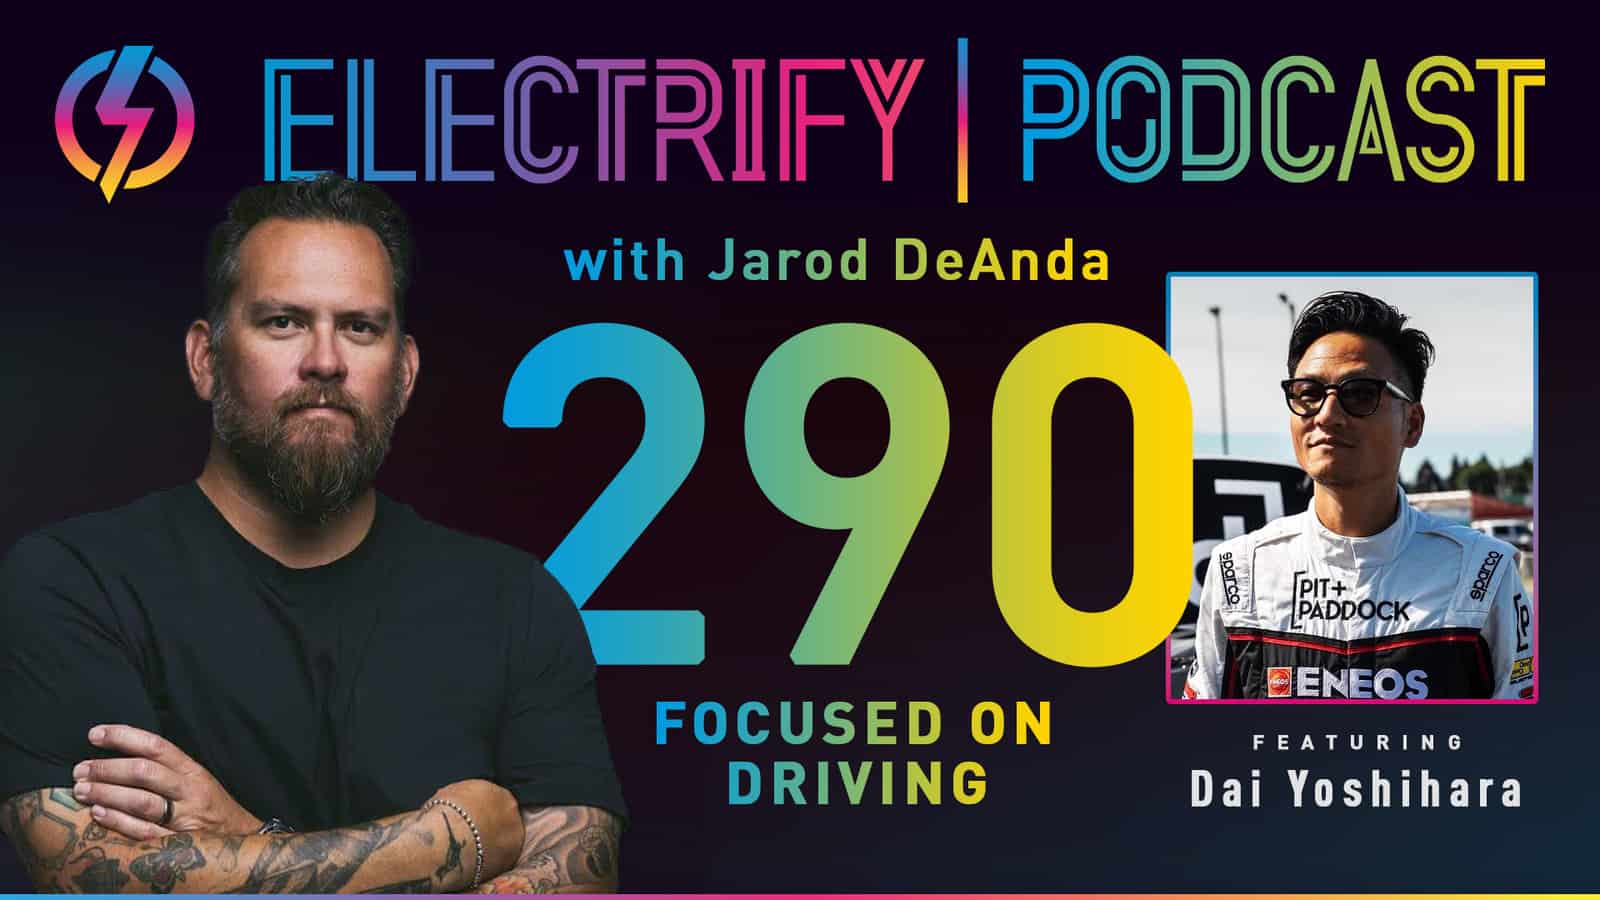 Image of Electrify Podcast episode 290 with host Jarod DeAnda and guest Dai Yoshihara